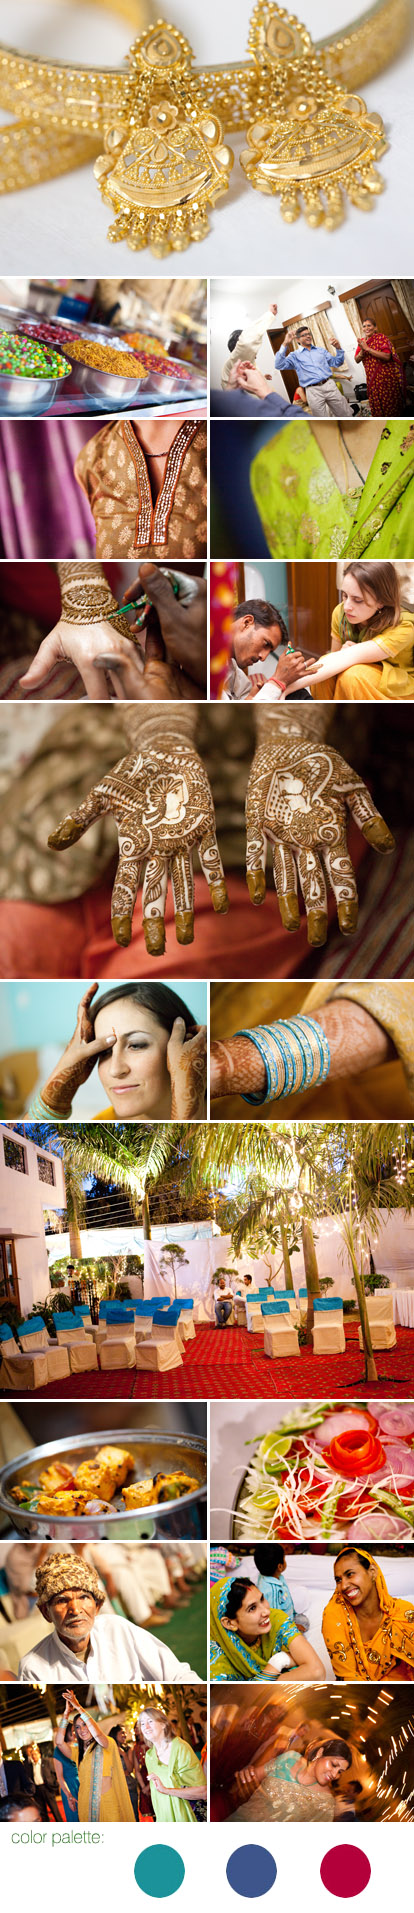 Traditional Norhtern Indian wedding cermonies, red, teal and peacock blue wedding color palette, images by Jihan Abdalla